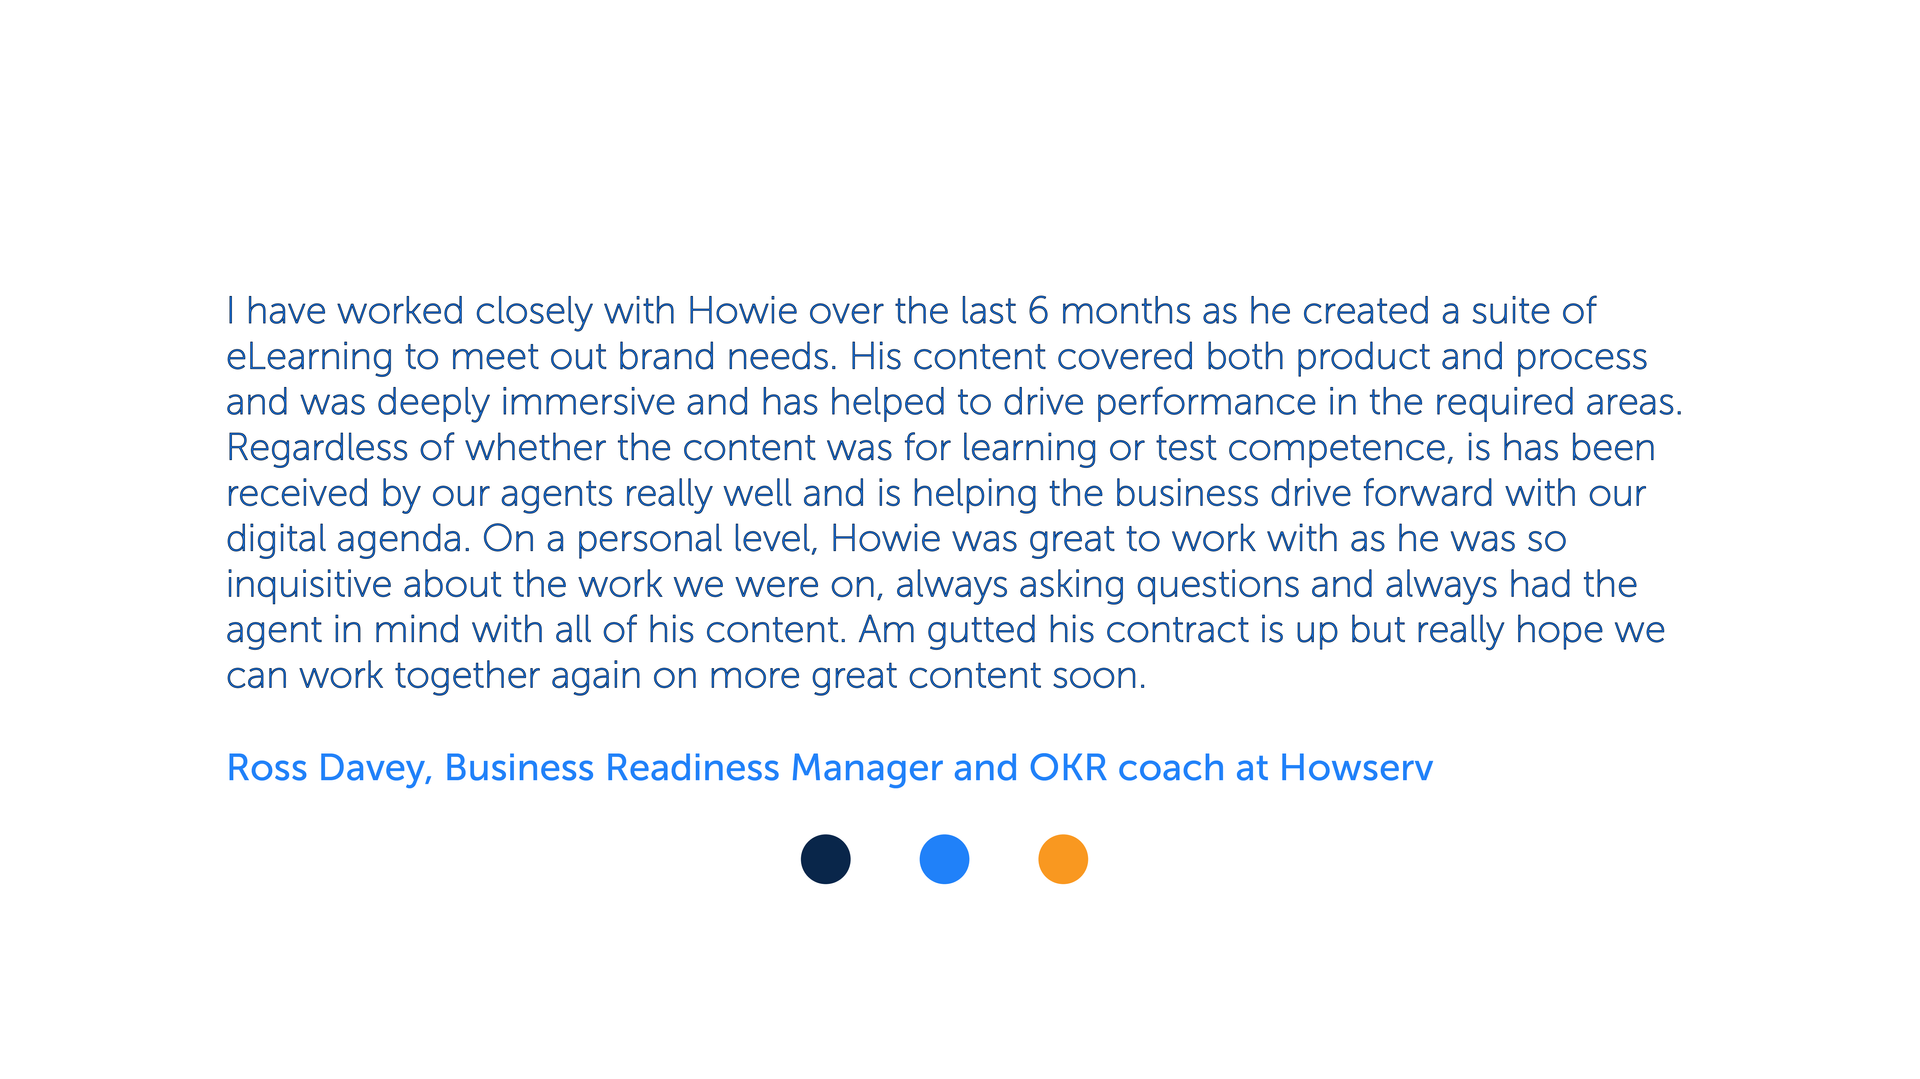 I have worked closely with Howie over the last 6 months as he created a suite of e learning to meet out brand needs. His content covered both product and process and was deeply immersive and has helped to drive performance in the required areas. Regardless of whether the content was for learning or test competence, is has been received by our agents really well and is helping the business drive forward with our digital agenda. On a personal level, Howie was great to work with as he was so inquisitive about the work we were on, always asking questions and always had the agent in mind with all of his content. Am gutted his contract is up but really hope we can work together again on more great content soon